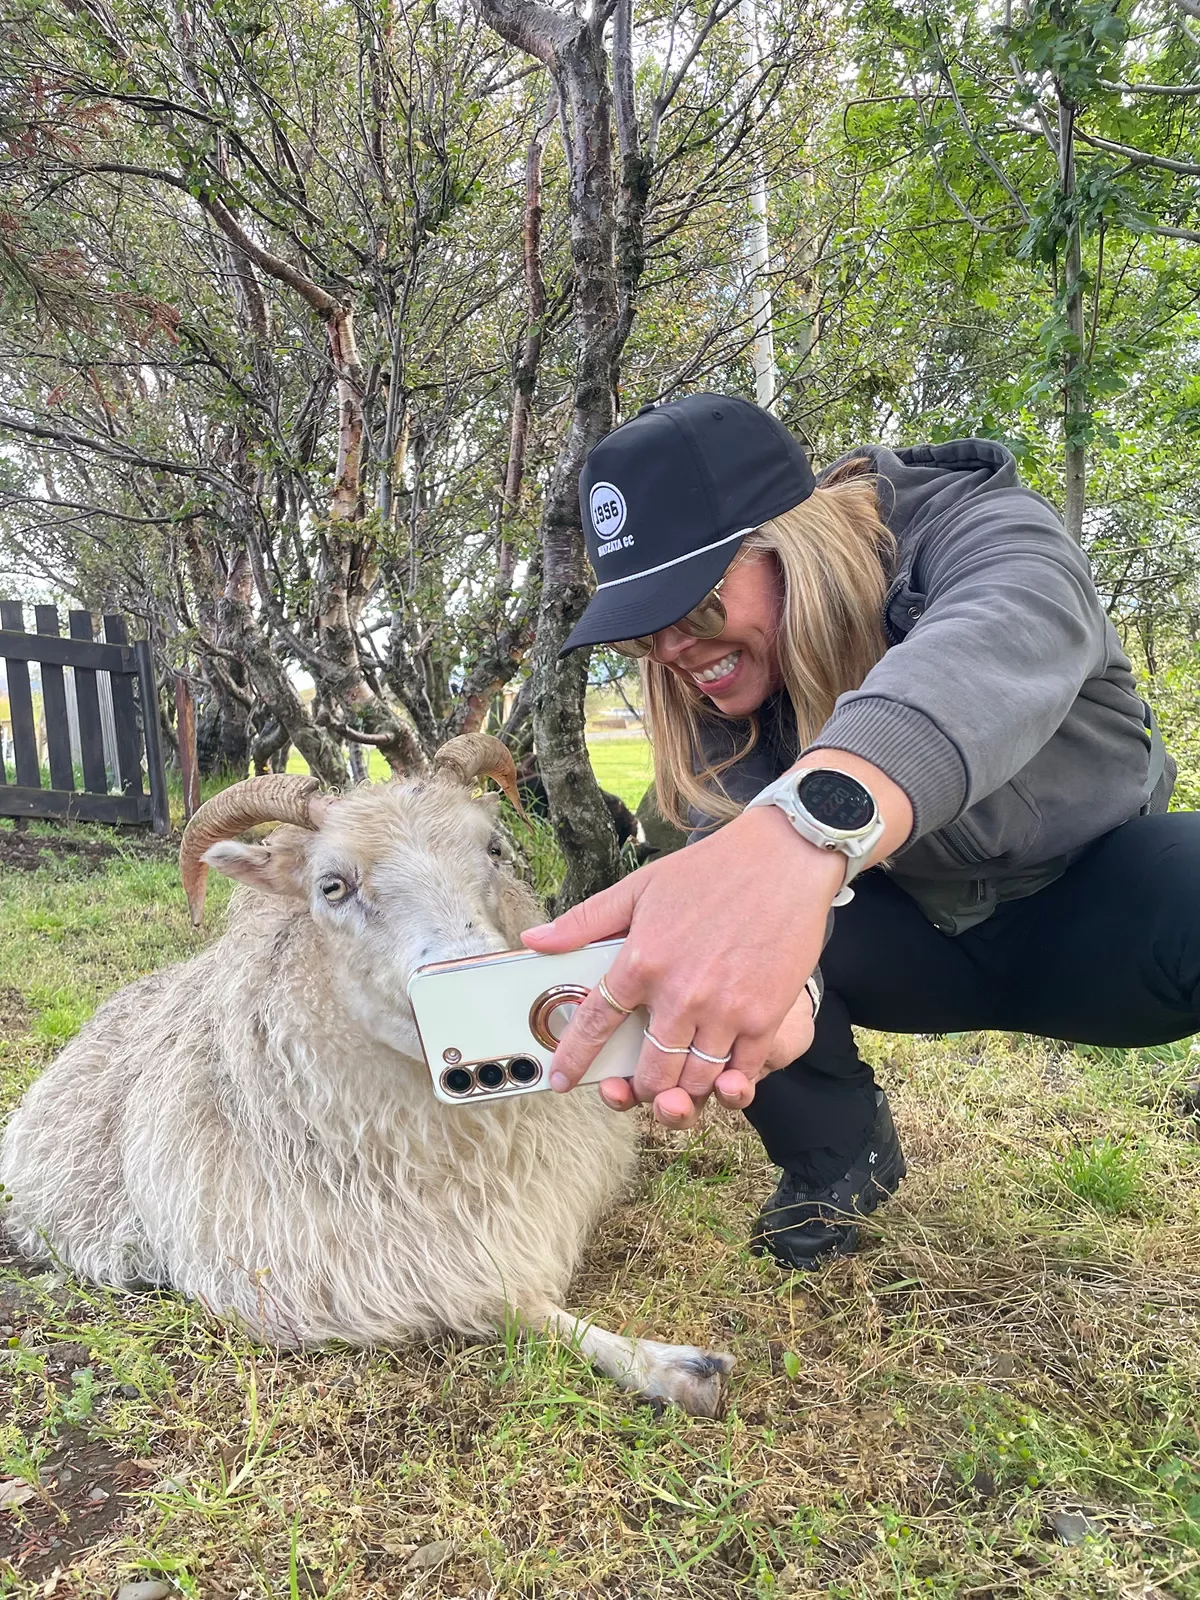 Woman taking a selfie with a goat